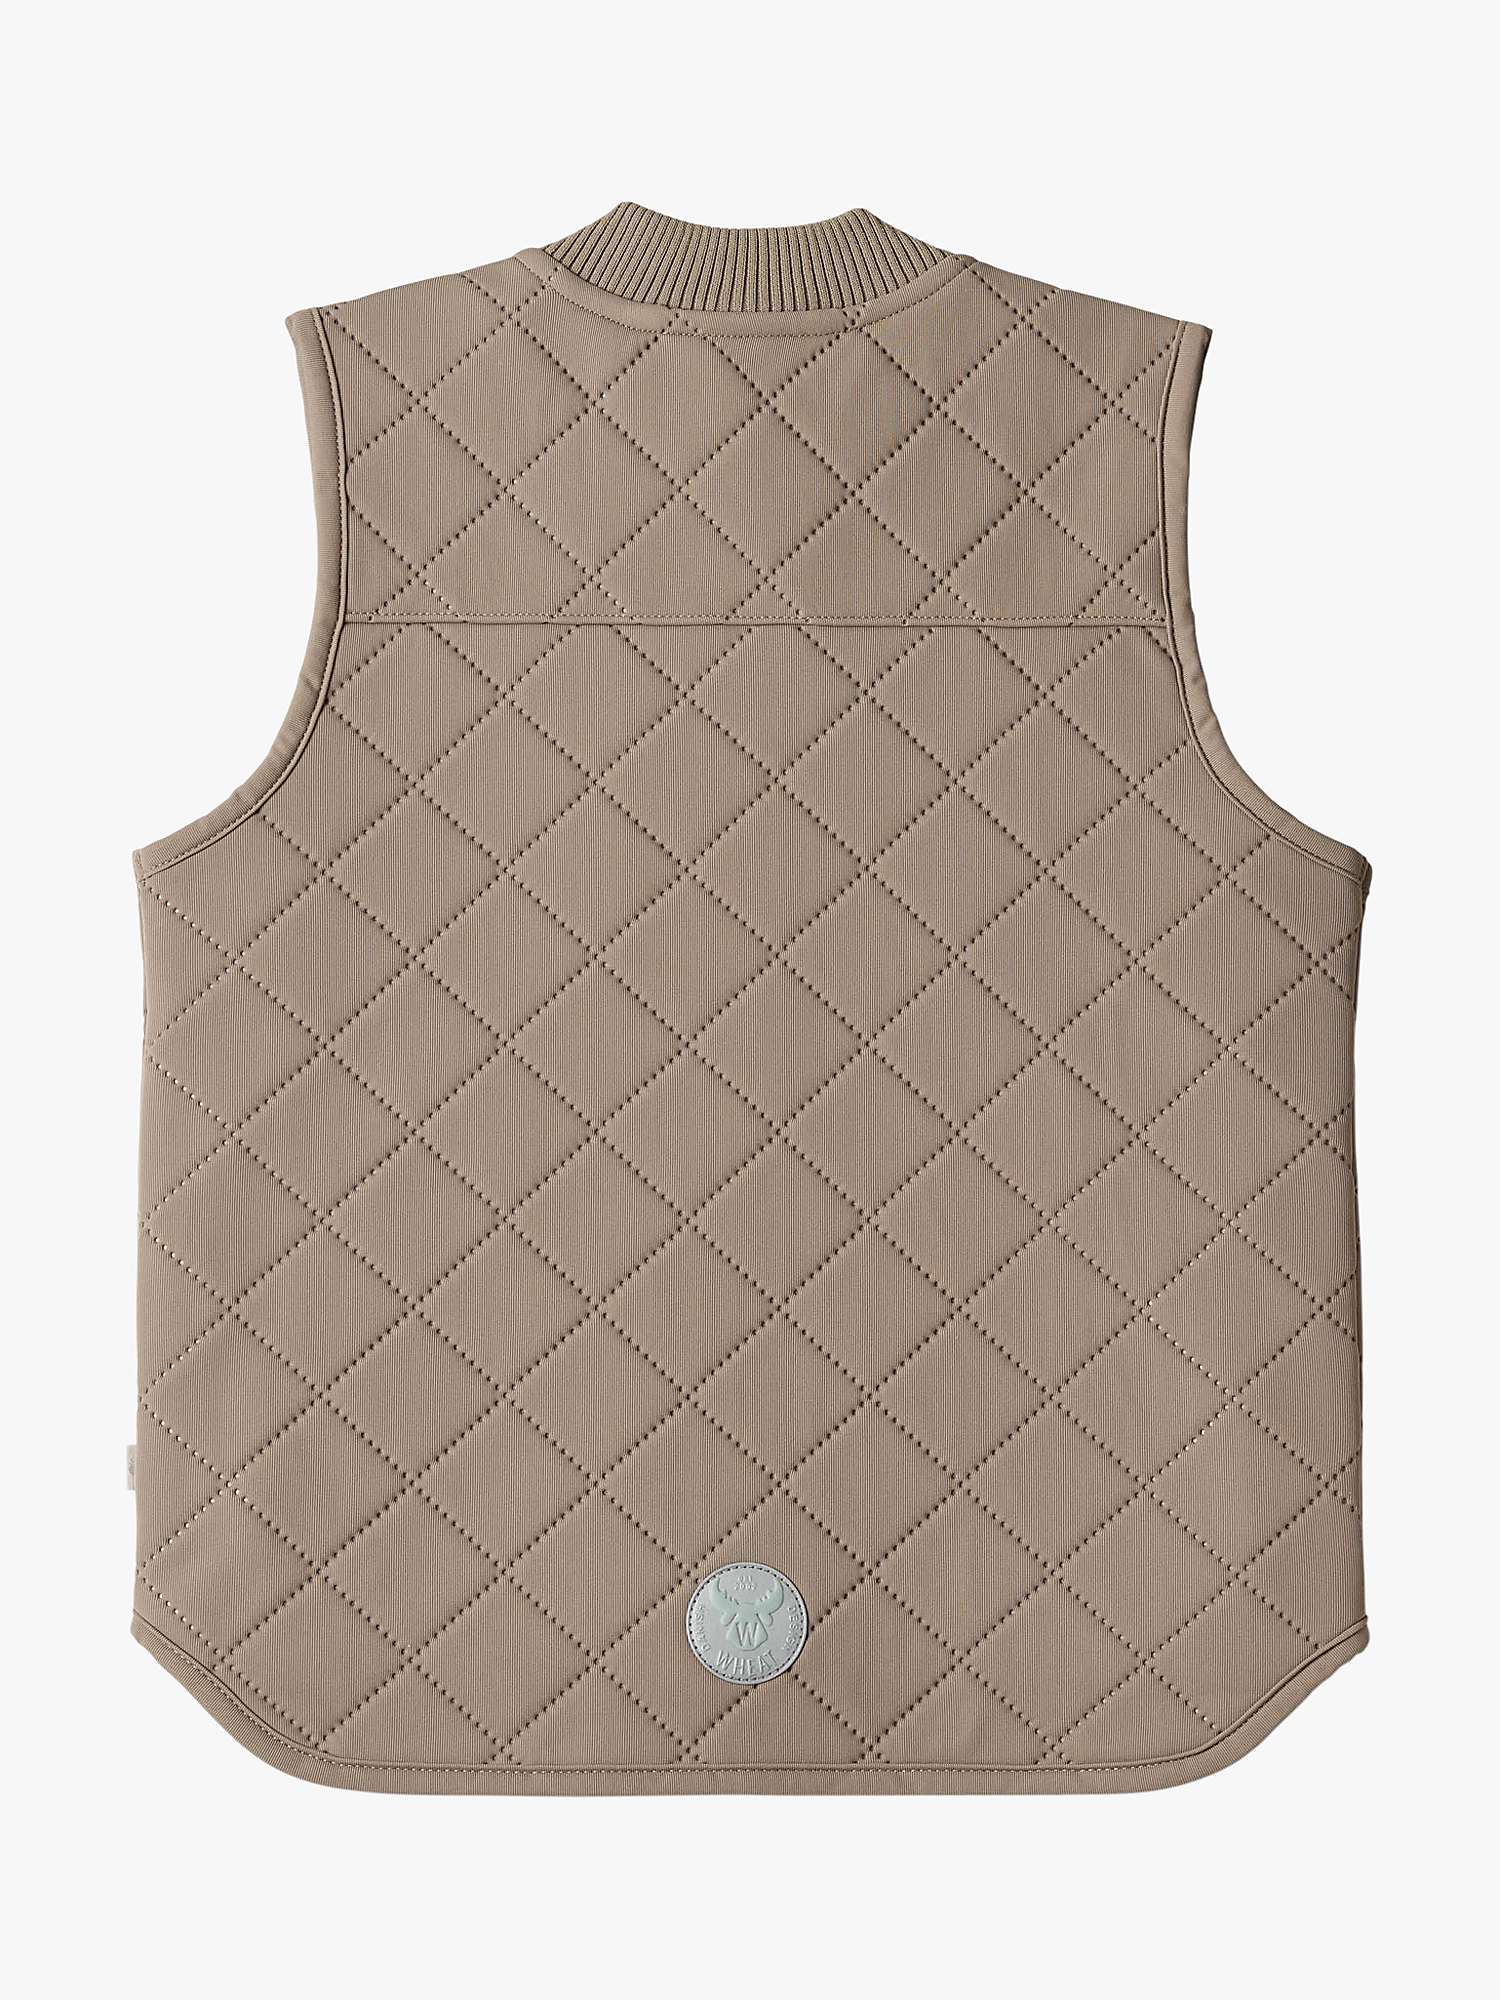 Buy WHEAT Kids' Thermo Gilet Online at johnlewis.com